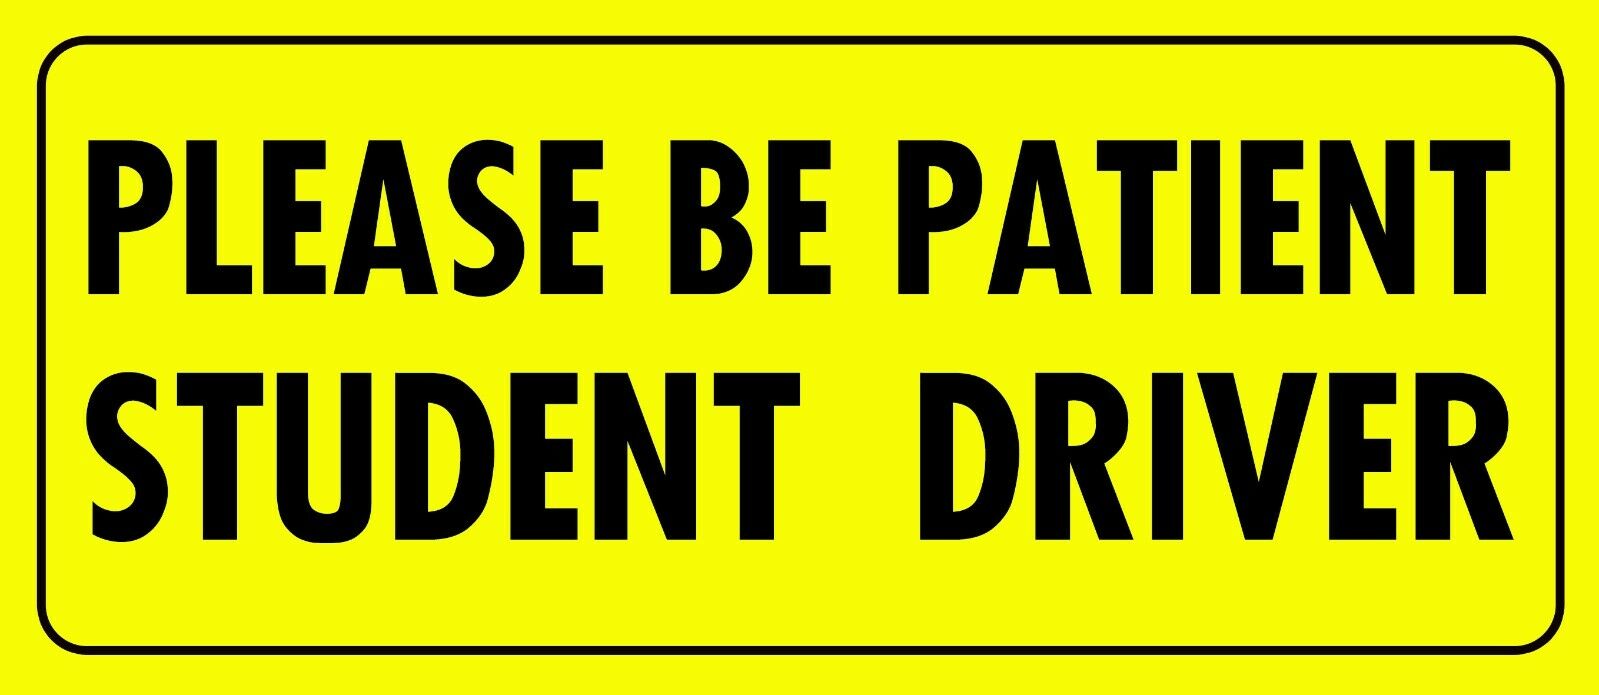 Be Patient Student Driver Magnet Laminated For Uv Protection Made In The Usa 8"